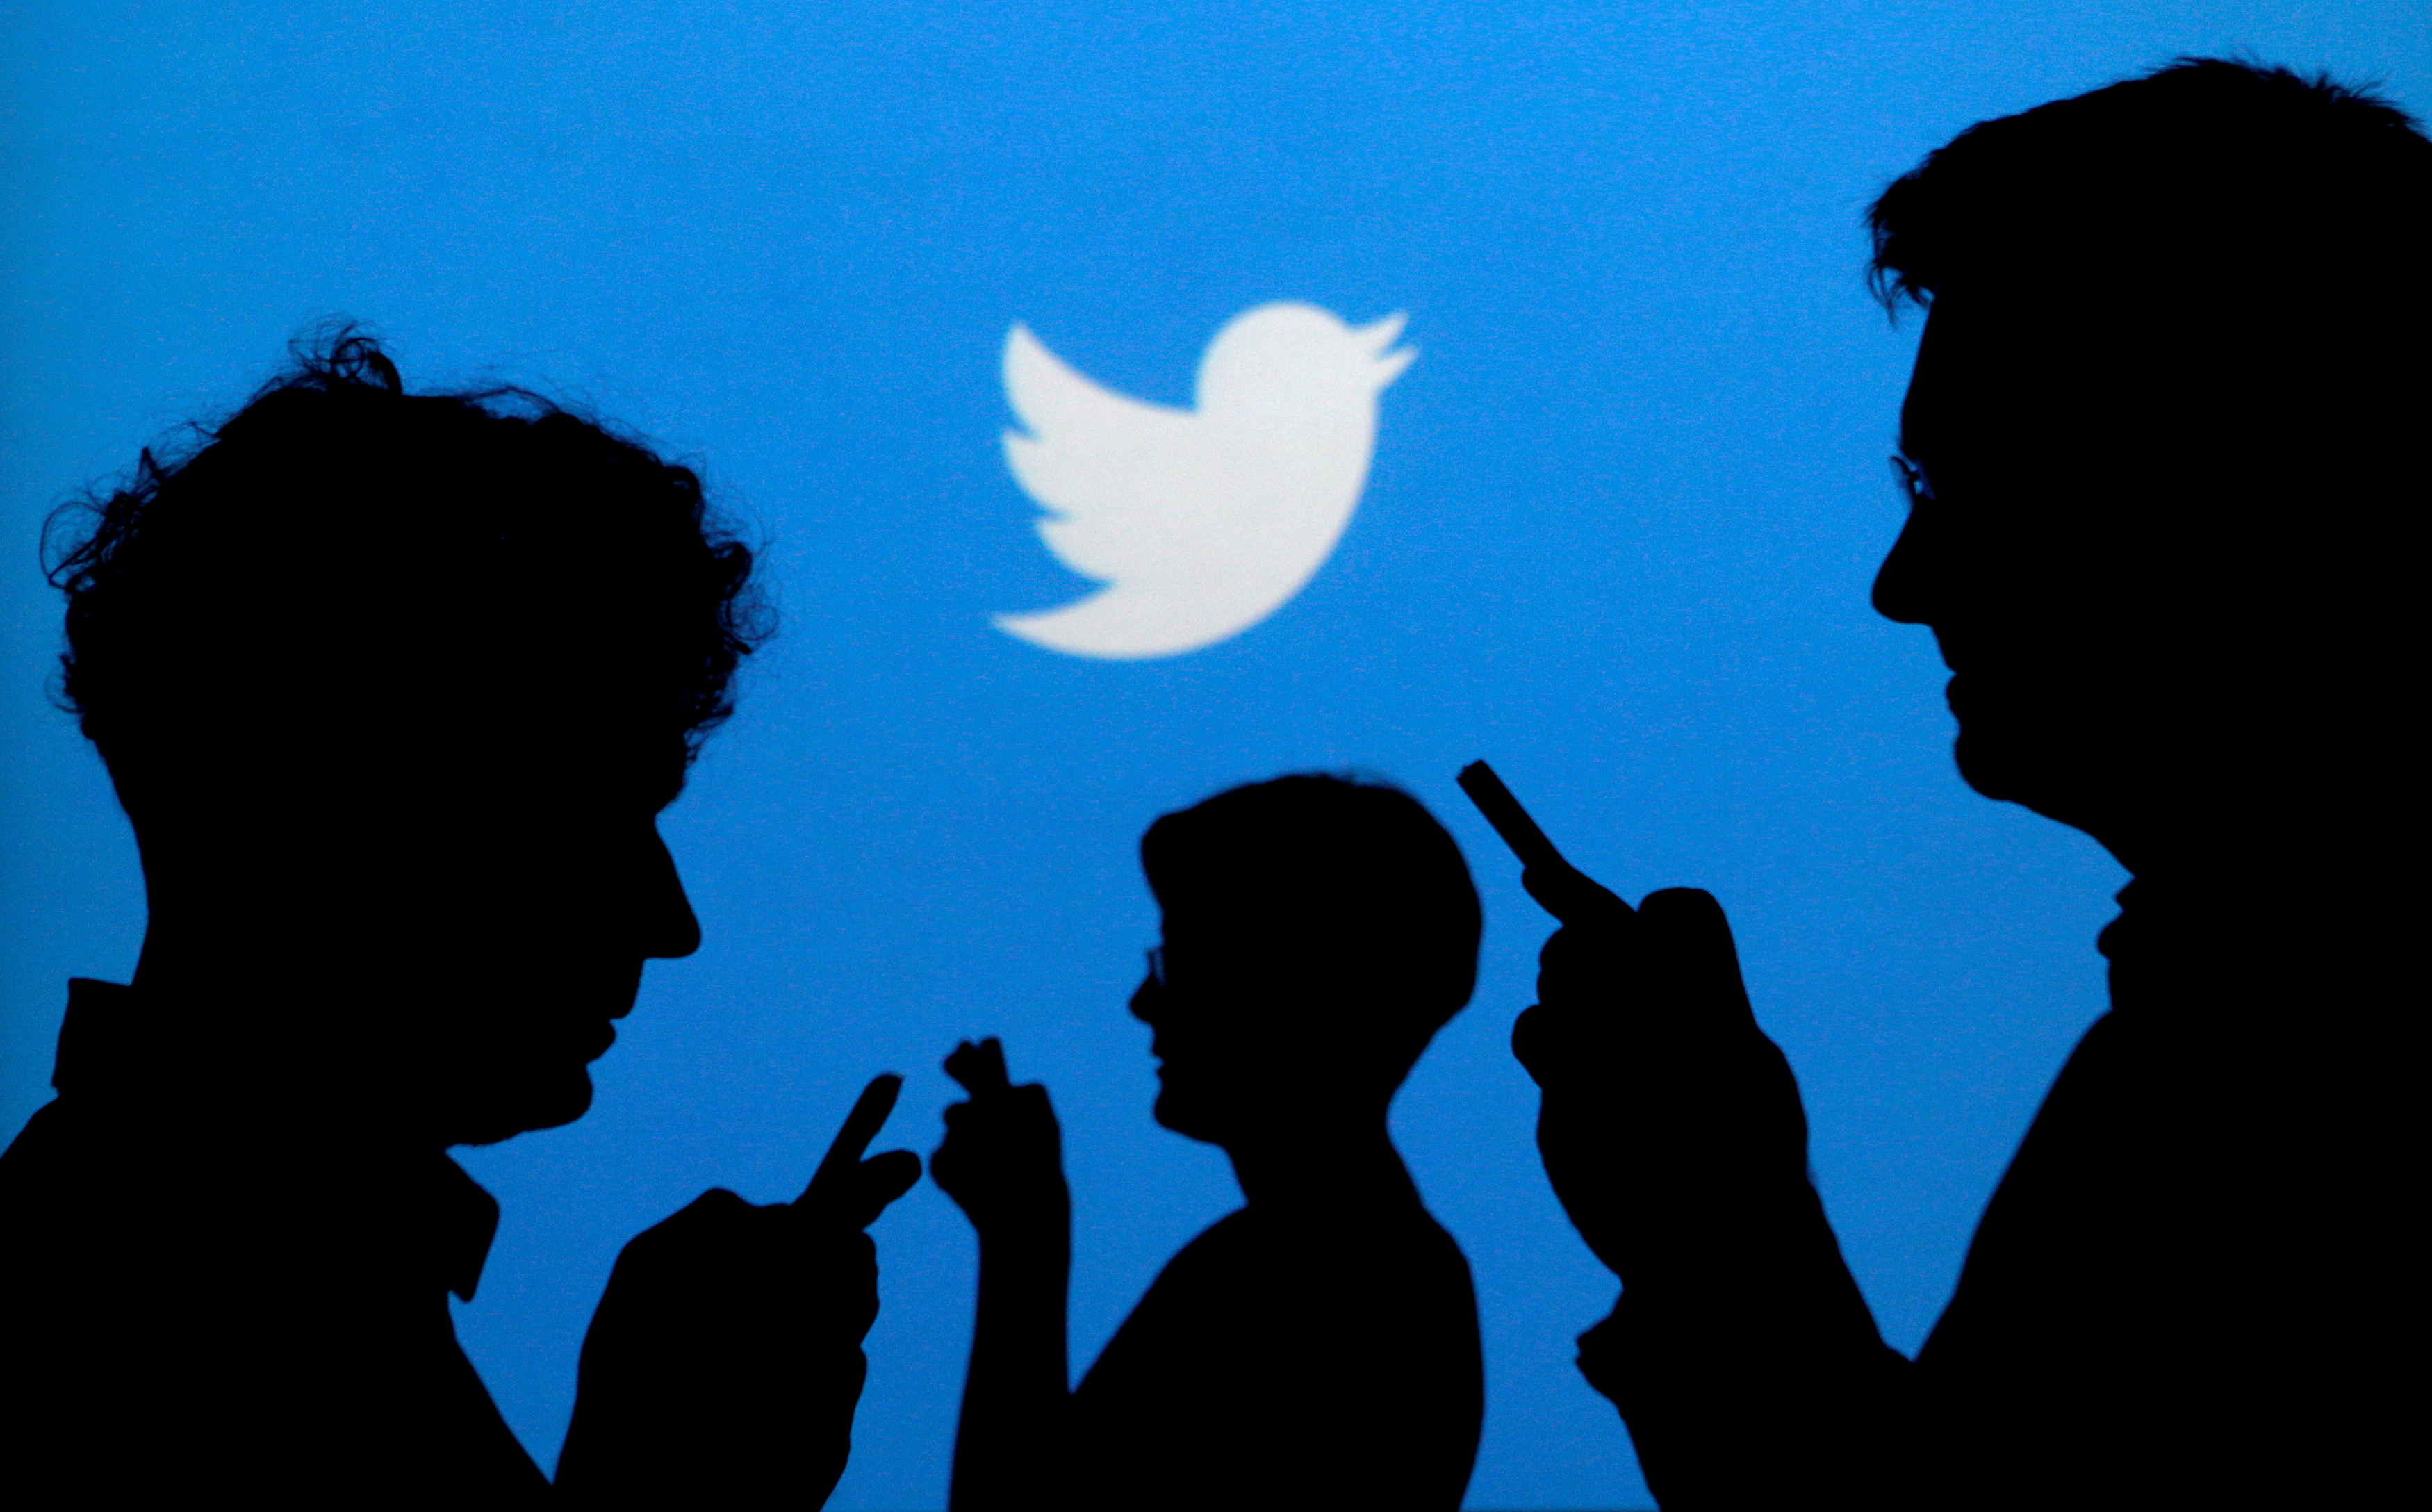 India to Twitter: Comply with IT rules or face 'unintended consequences' | Reuters